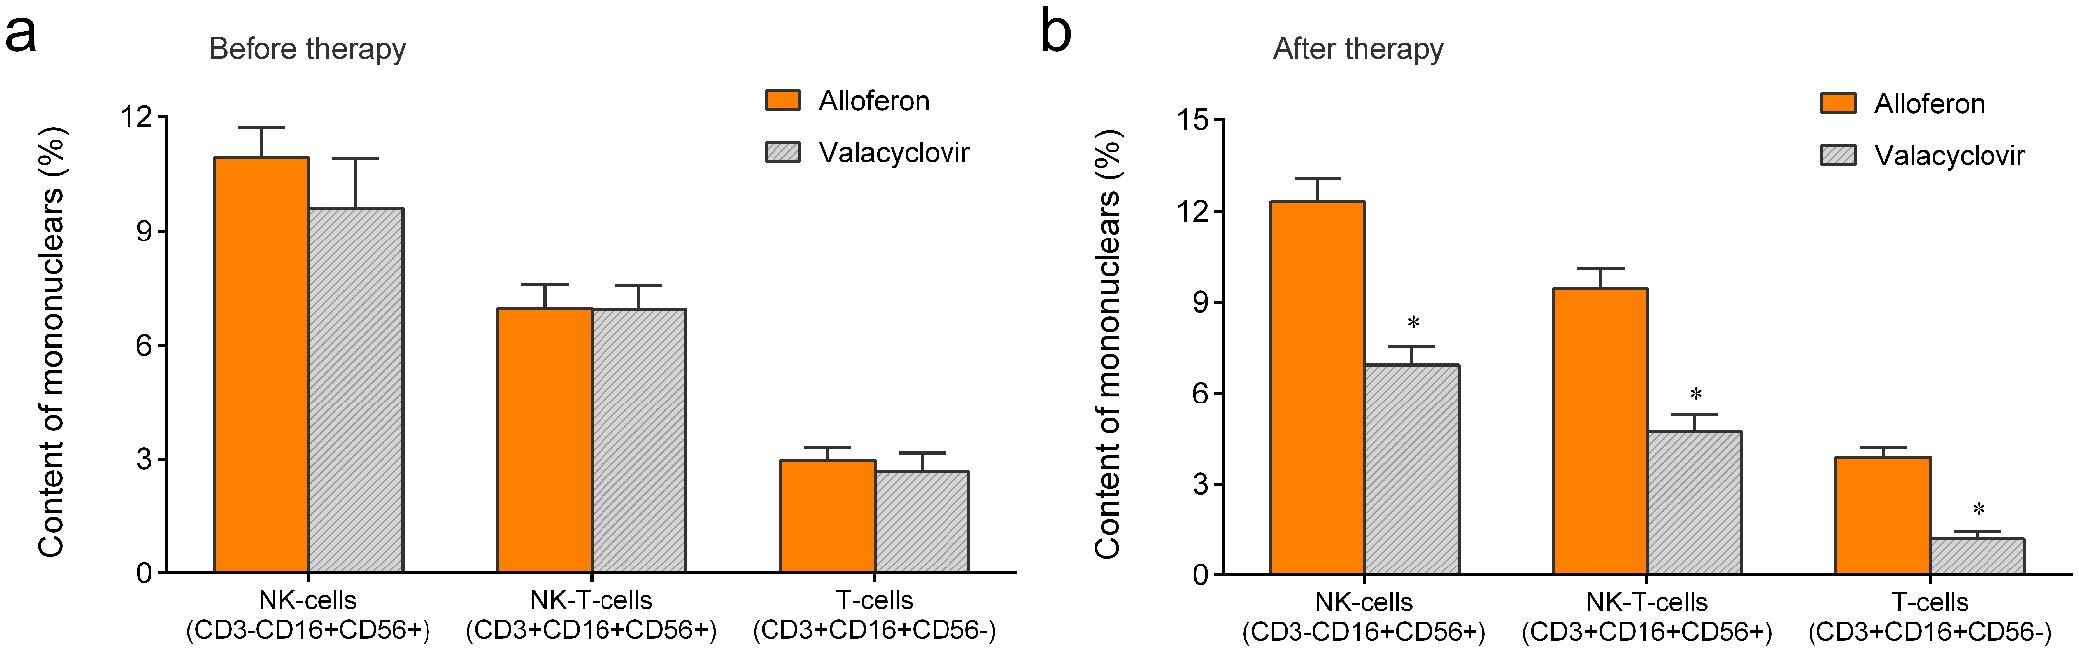 NK, NKT, and T cell content (%) in blood before and at 6 weeks after completion of therapy by alloferon or valacyclovir in CEBVI patients (*<italic>p</italic> < 0.05).